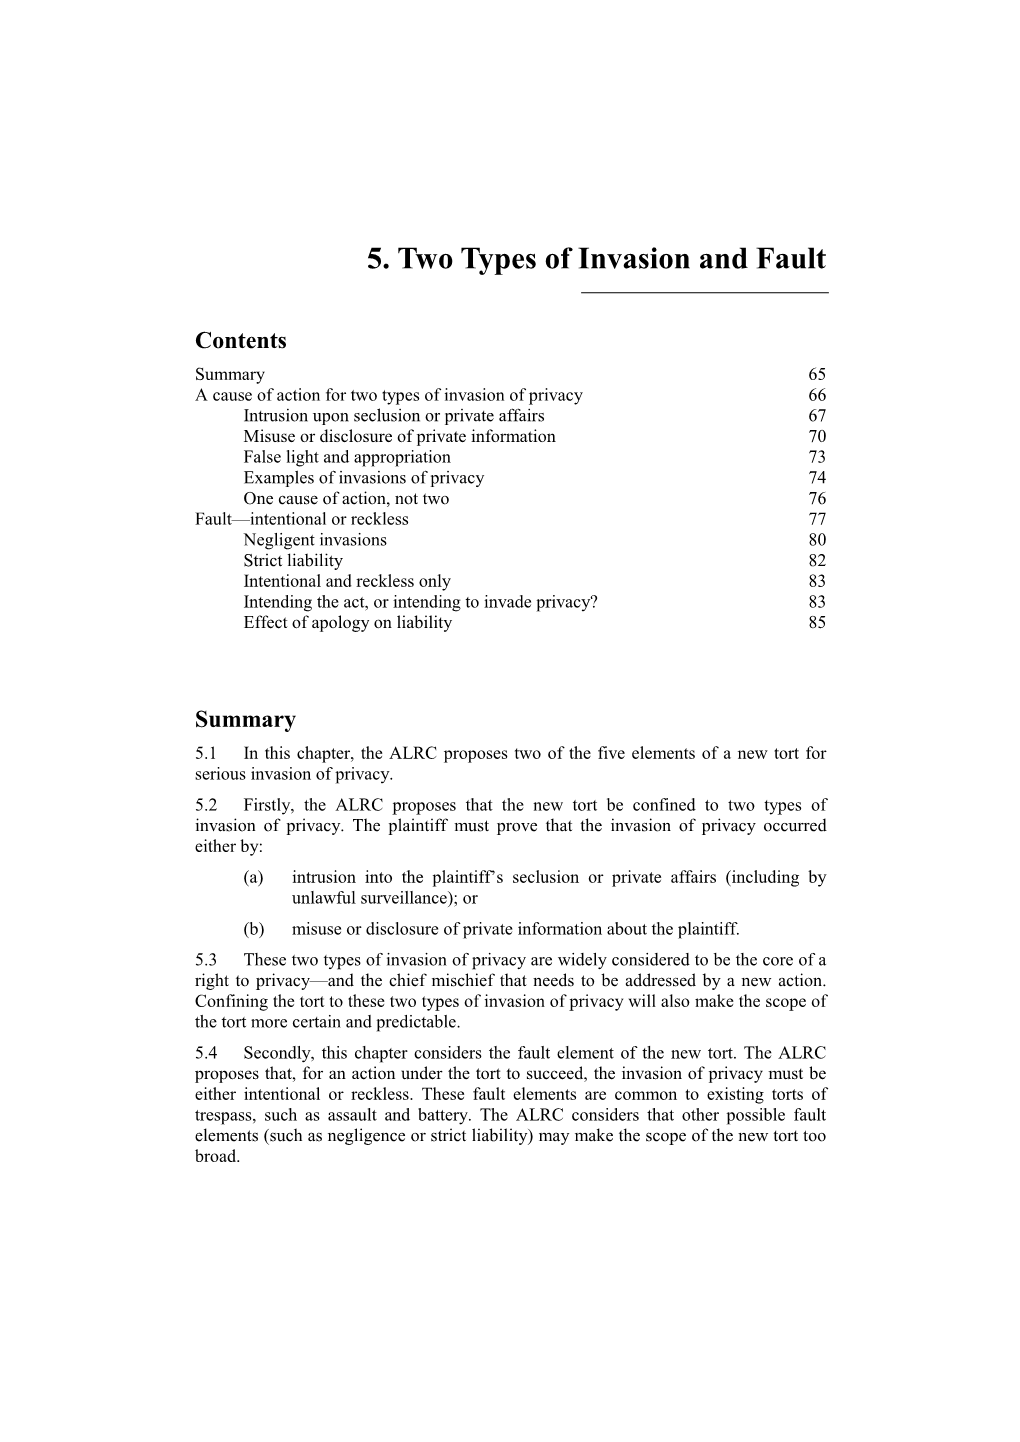 5. Two Types of Invasion and Fault